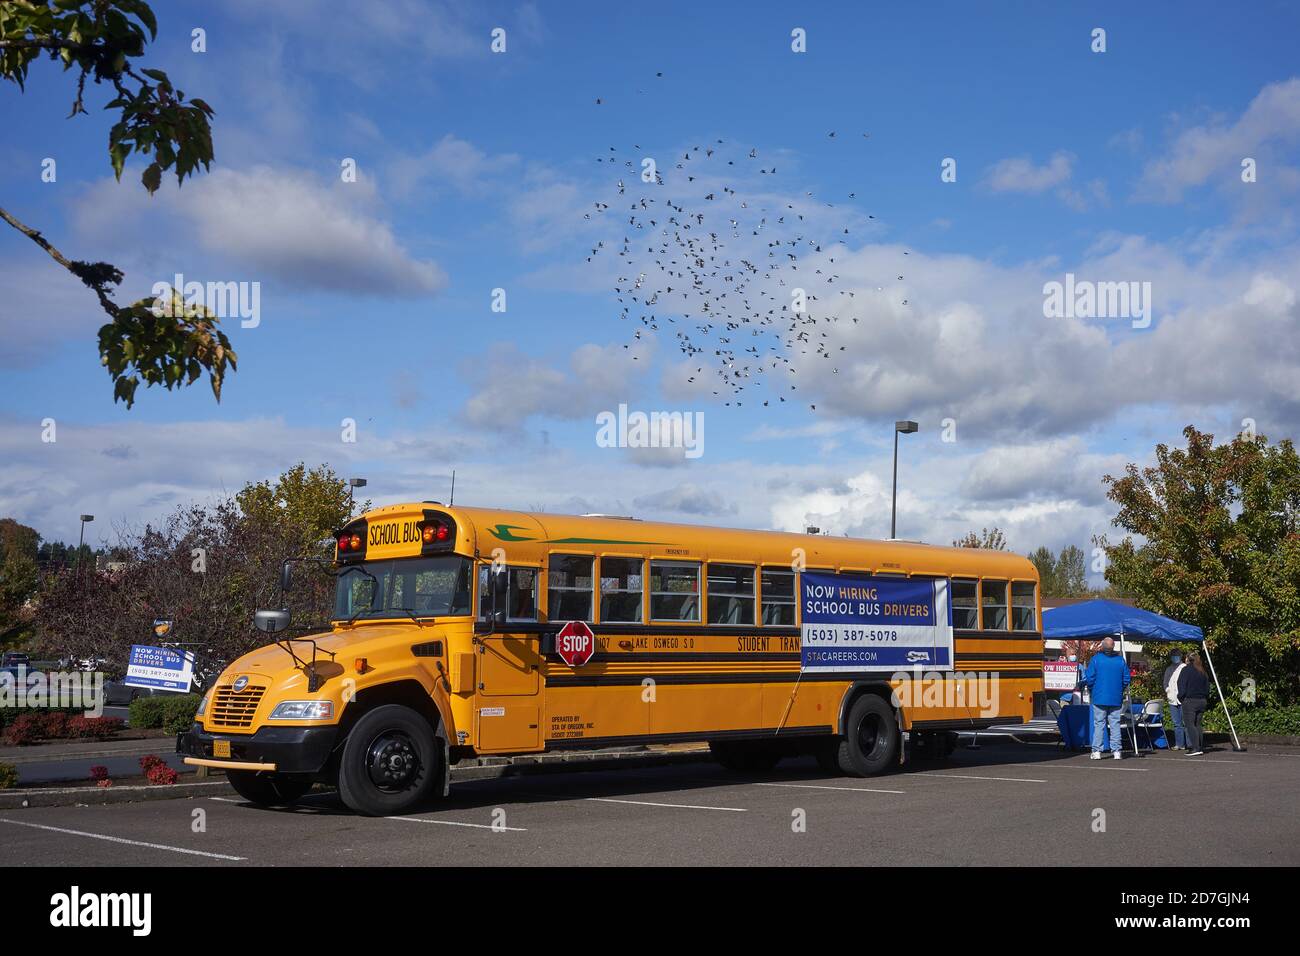 A school bus driver recruitment booth is seen in a parking lot in Tigard, Oregon, on Wednesday, October 21, 2020, amid the coronavirus pandemic. Stock Photo